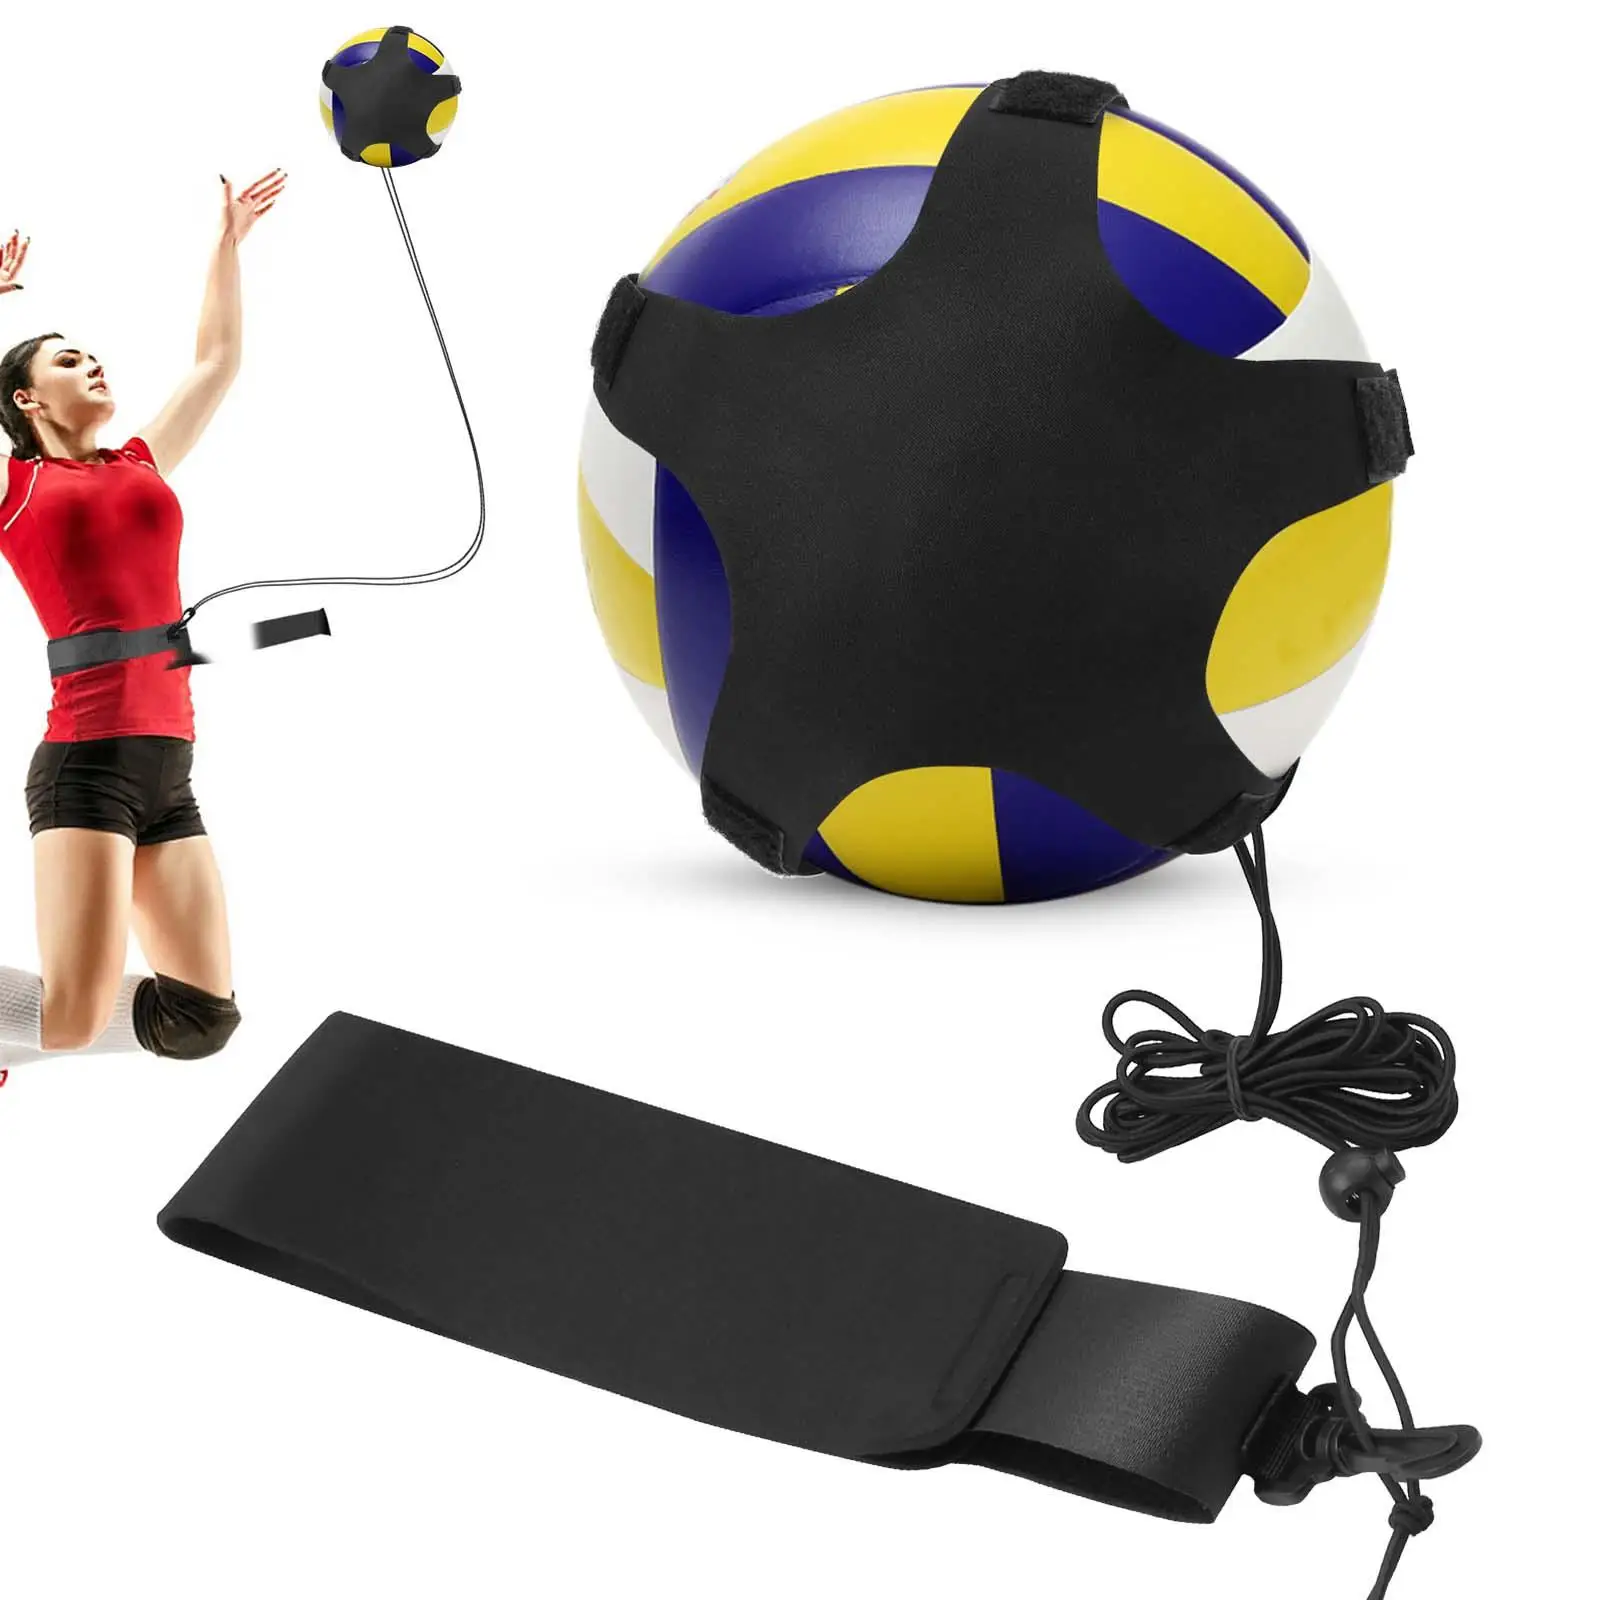 Volleyball Training Equipment Aid Elastic Cord Solo Practice Trainer for Beginners